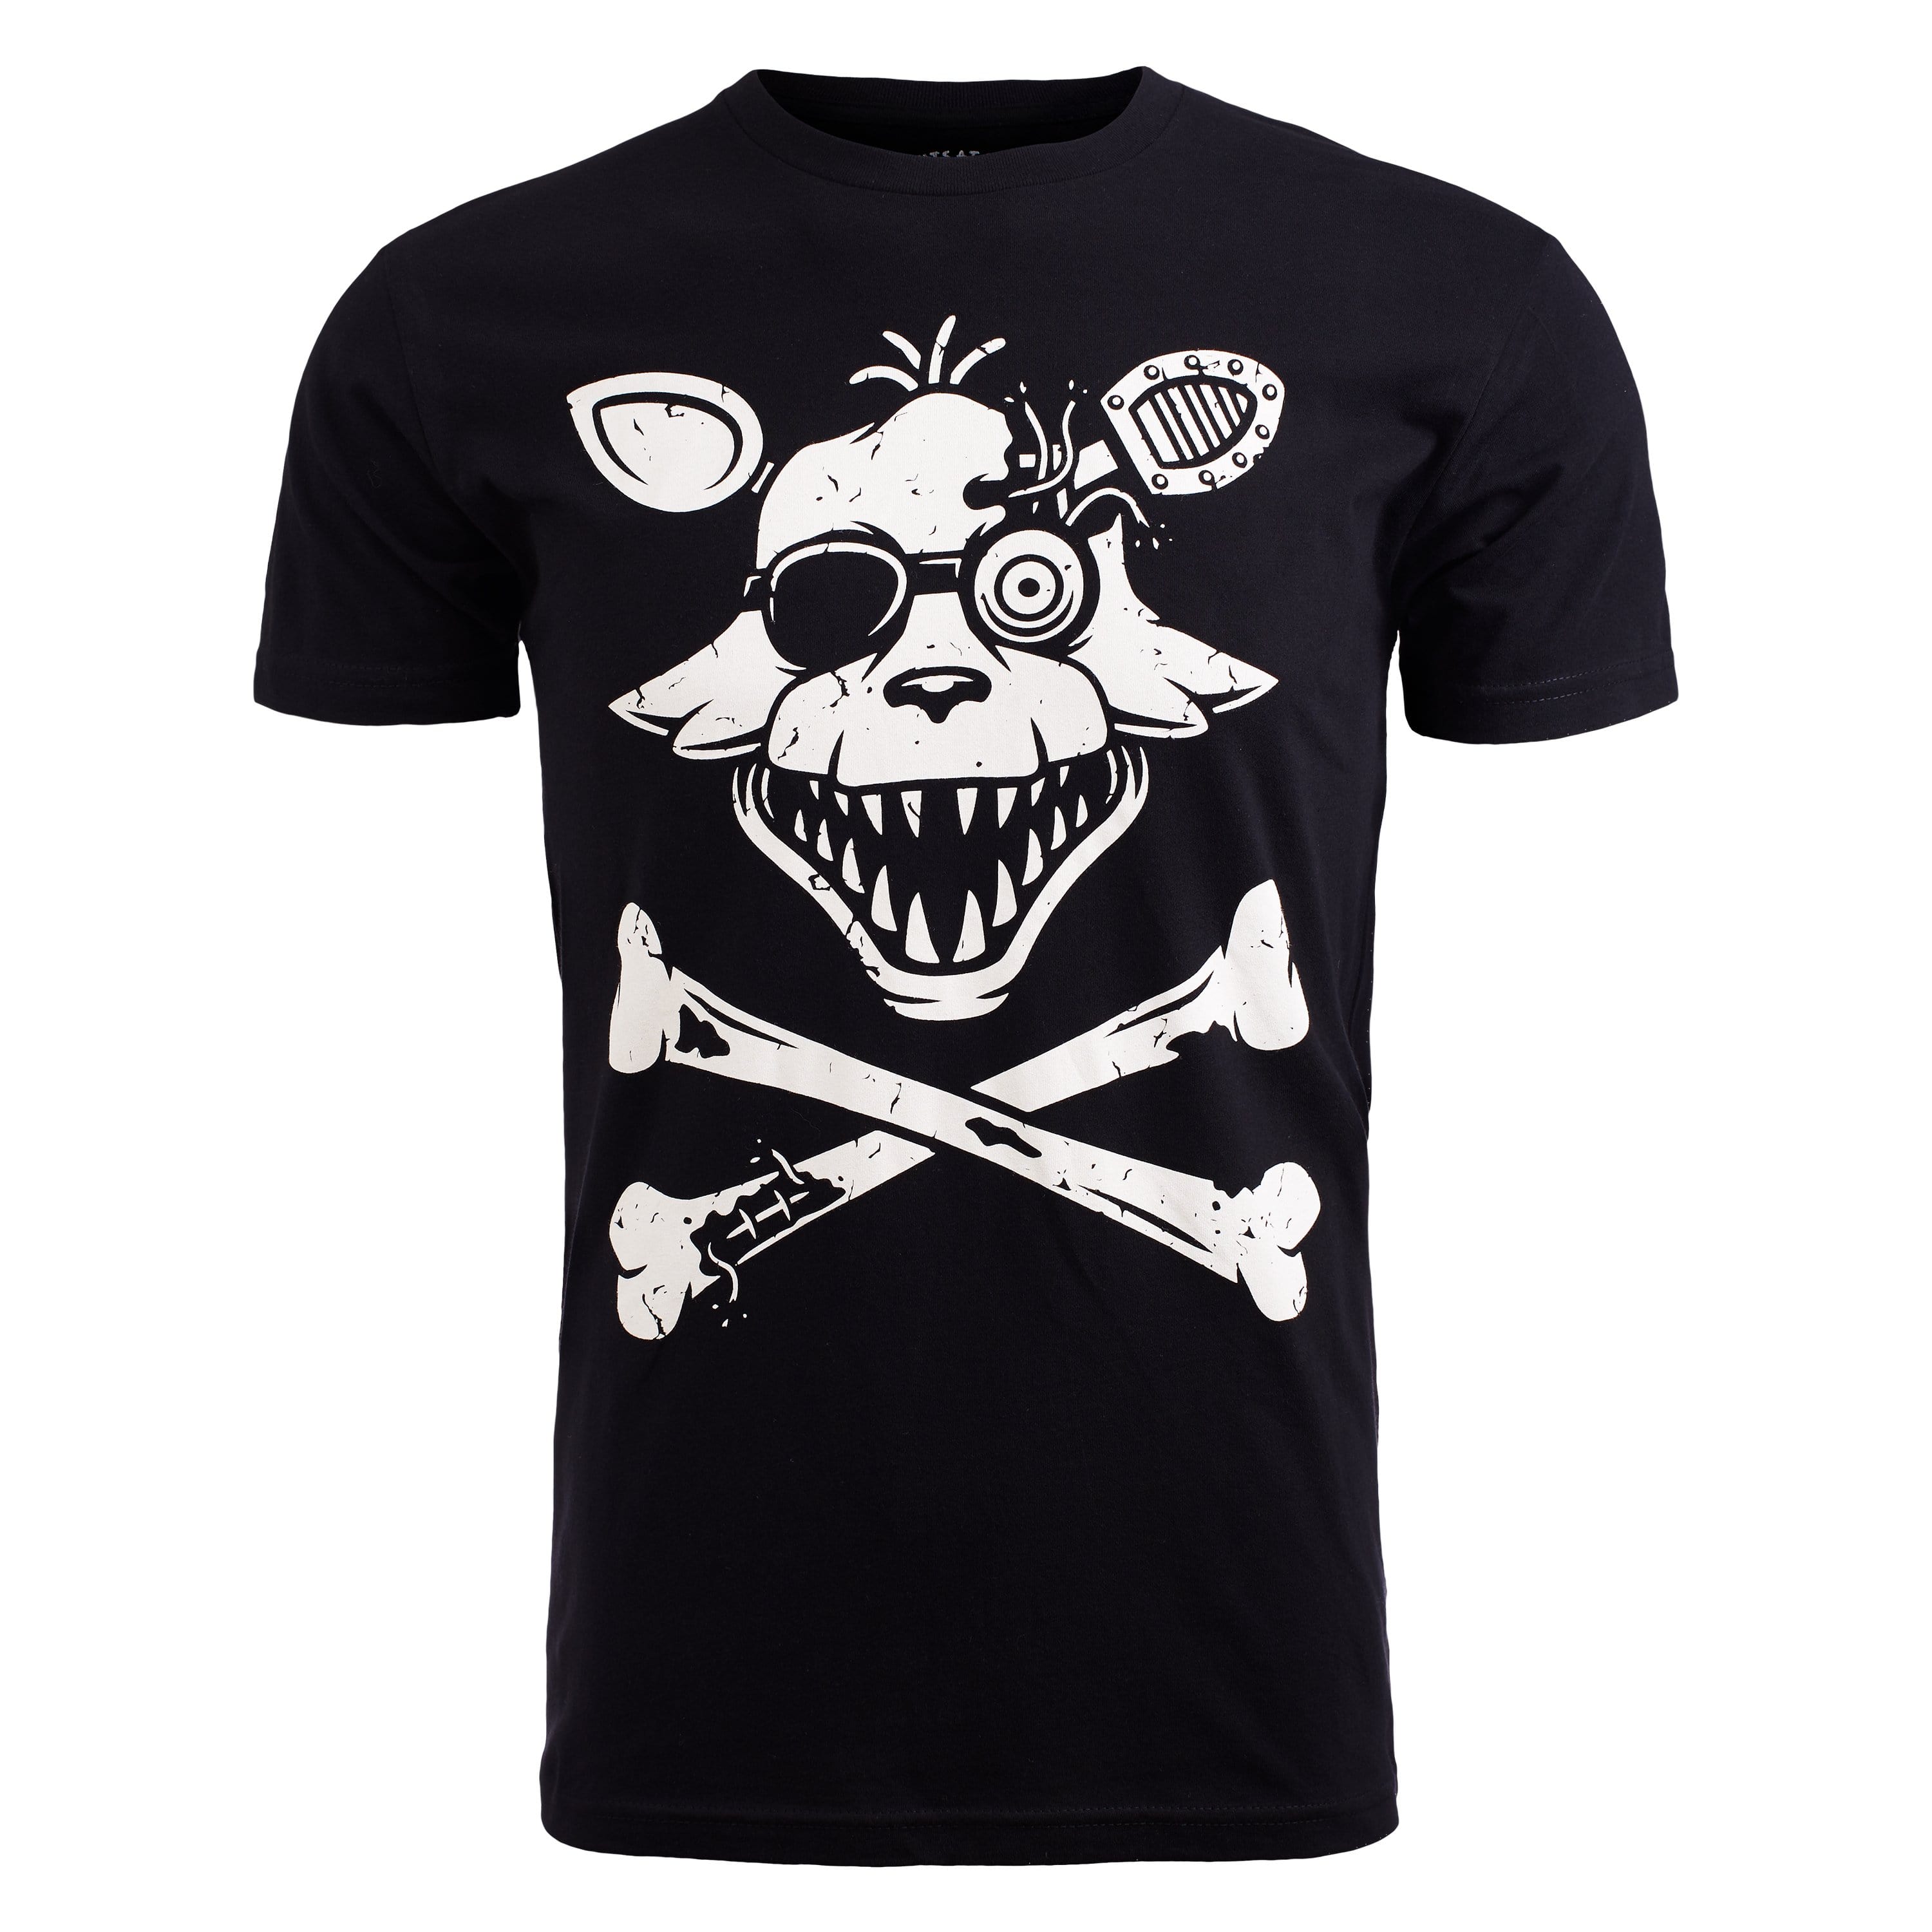 Five Nights at Freddy's - Foxy Roger Tee